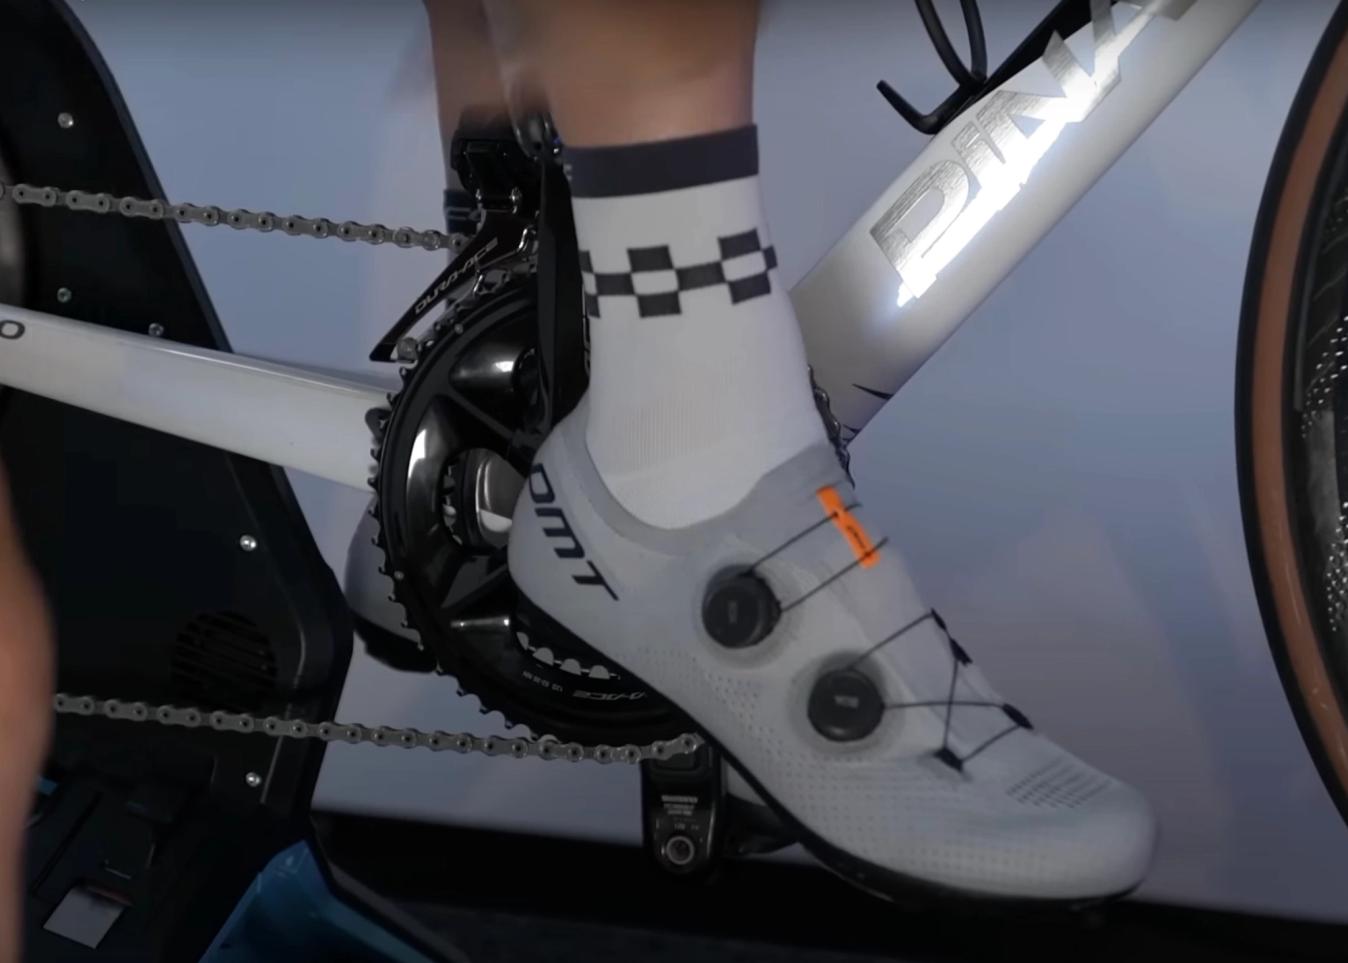 Making sure your cleats are set up so that your heal stays clear of the cranks is important not just aesthetically 